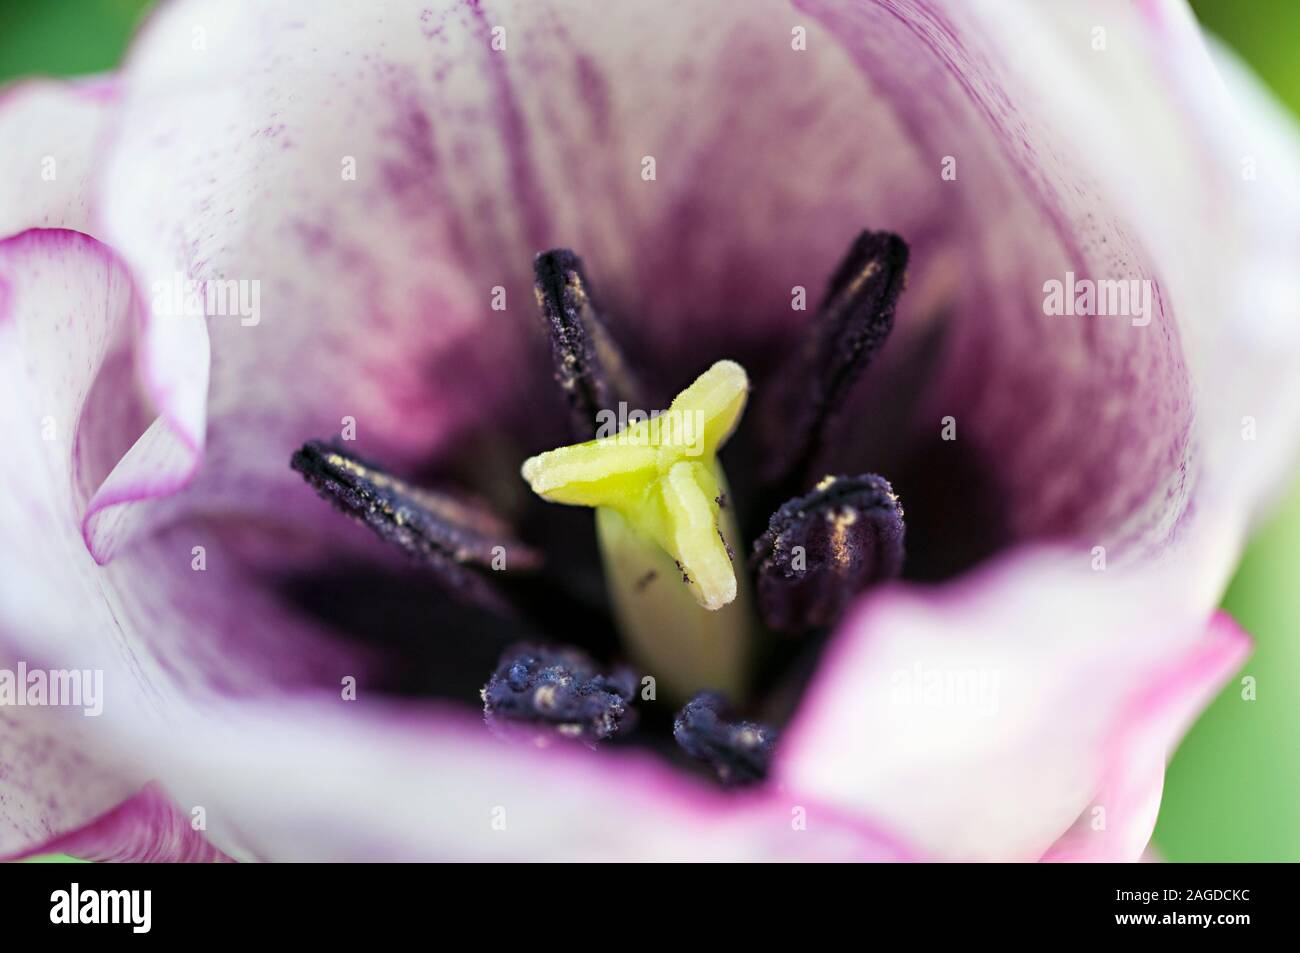 Close up of a Shirley tulip showing stigma and stamen. A white and purple edged bowl shaped tulip belonging to the Triumph group of tulips Division 3 Stock Photo